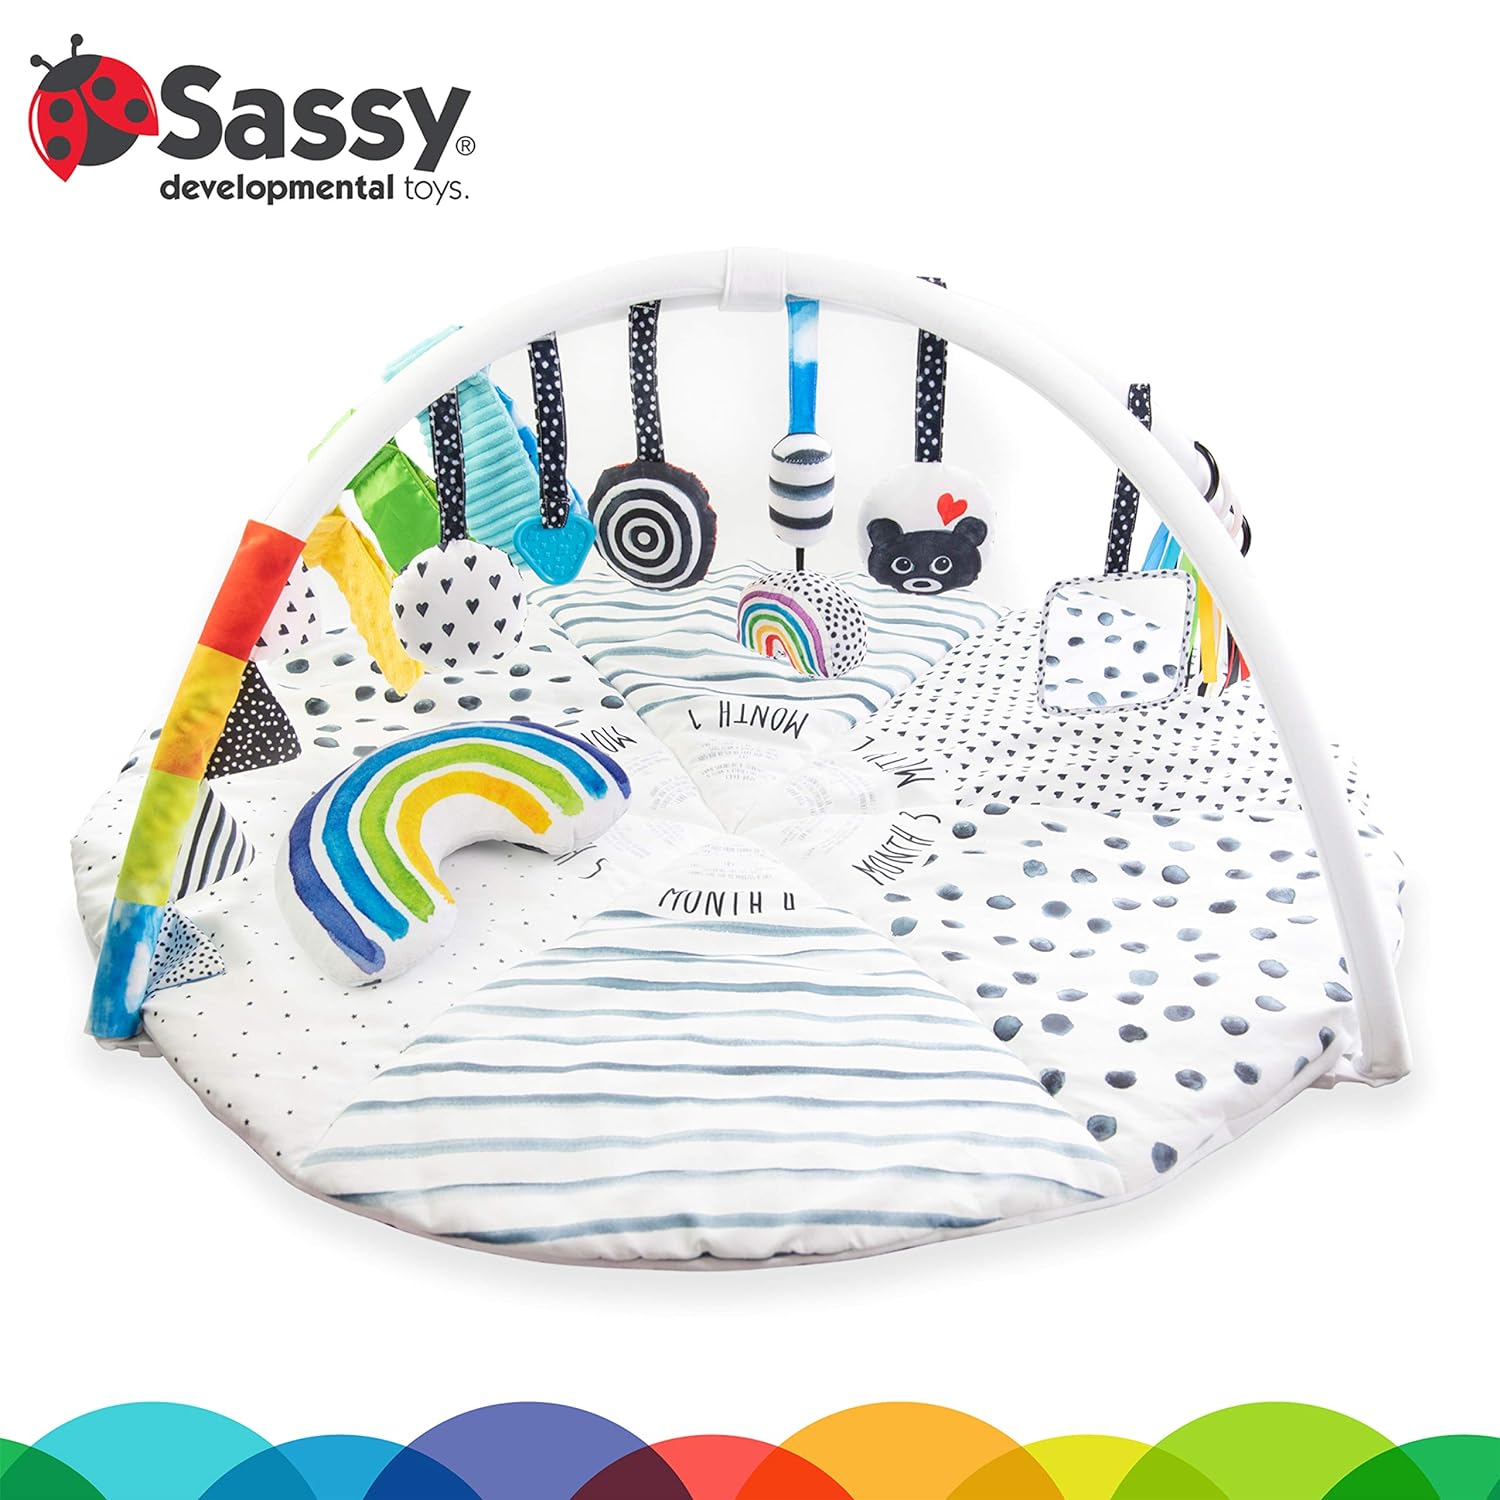 Sassy Stages STEM Developmental Play Gym, Sensory Tummy Time Activity Play Mat w\/Built-in Instructions, Ultra Plush & Machine Washable Playmat for Babies & Toddlers